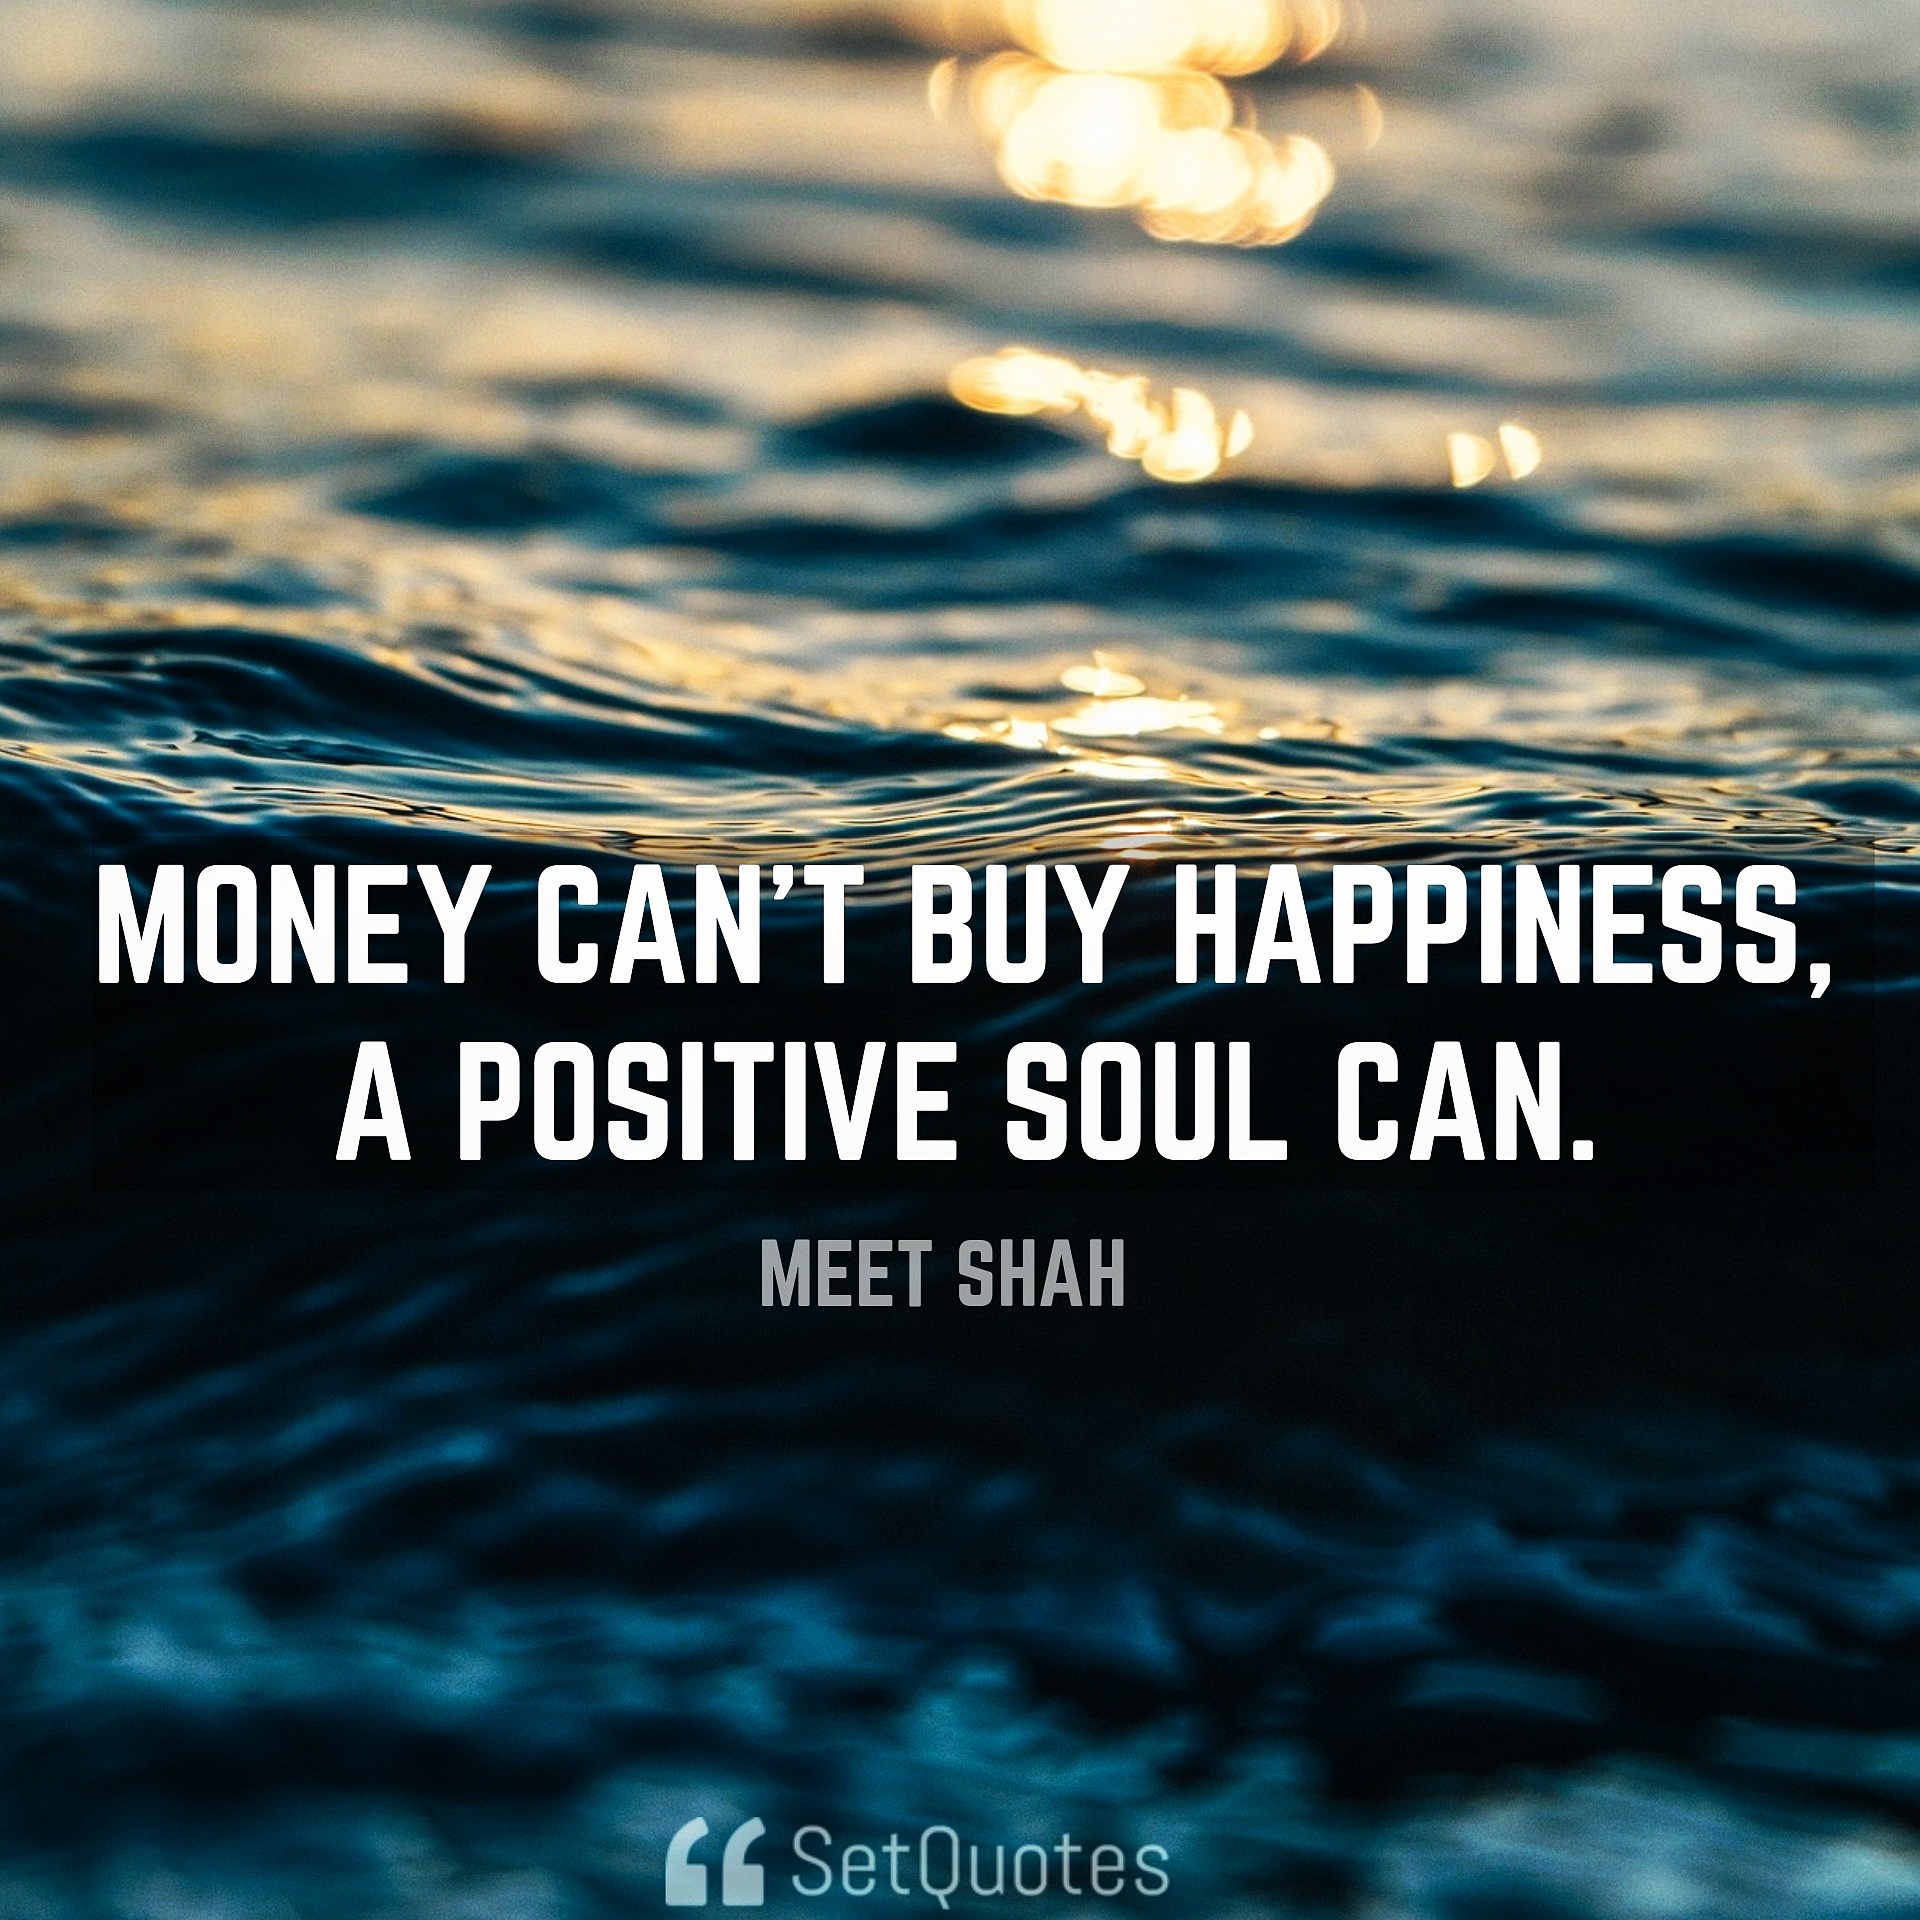 Money can’t buy happiness, A positive soul can. - Money Doesn't Buy Happiness quotes 